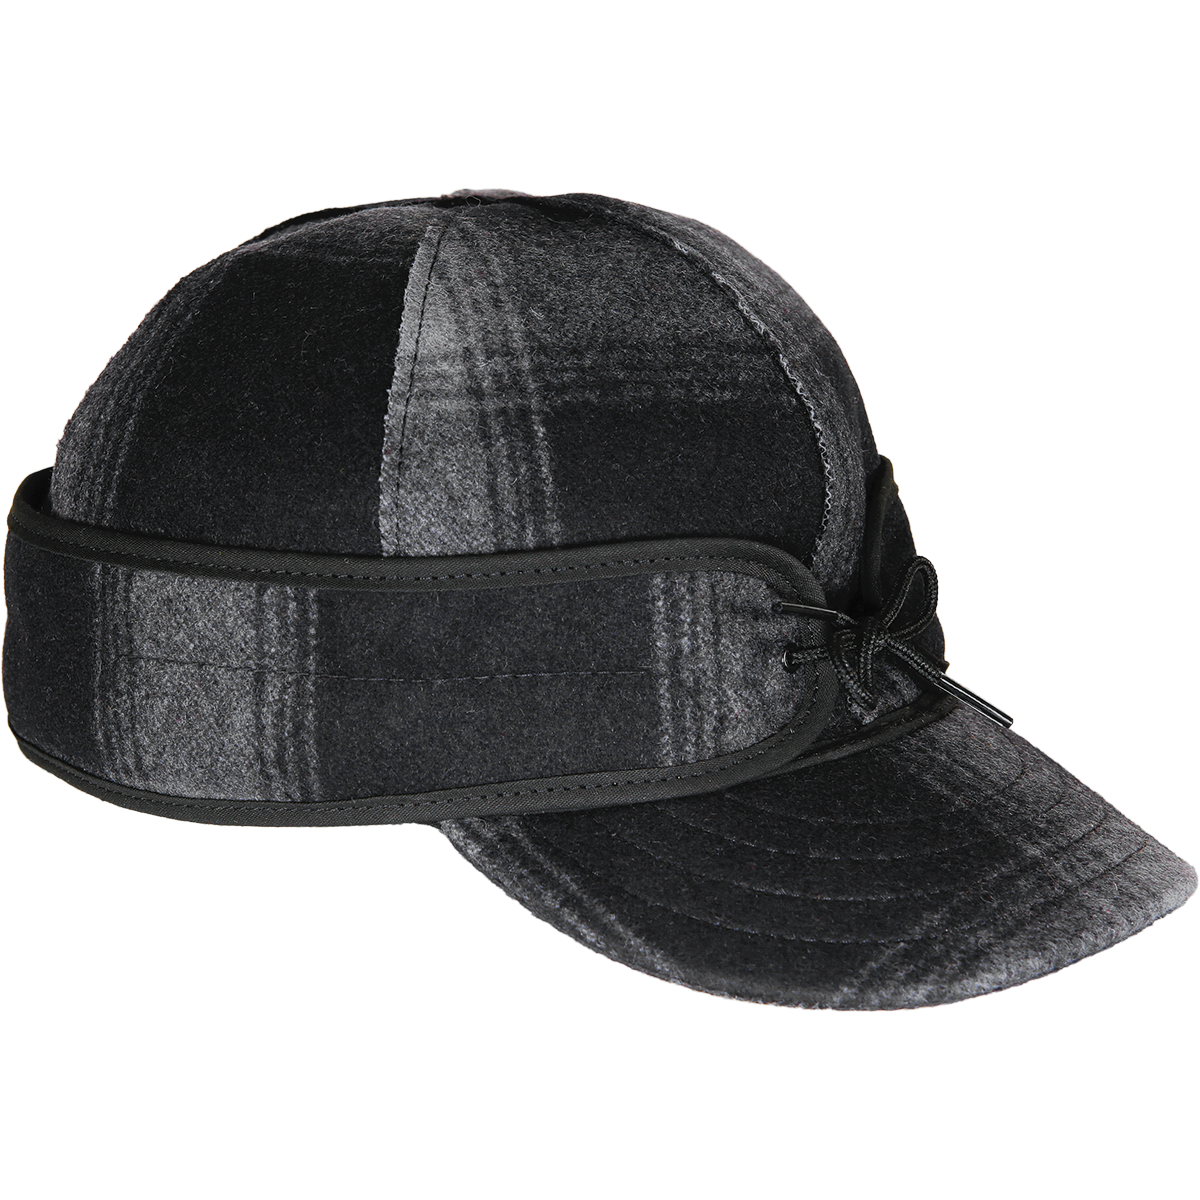 Picture of Stormy Kromer 50010 The Original Stormy Kromer Cap